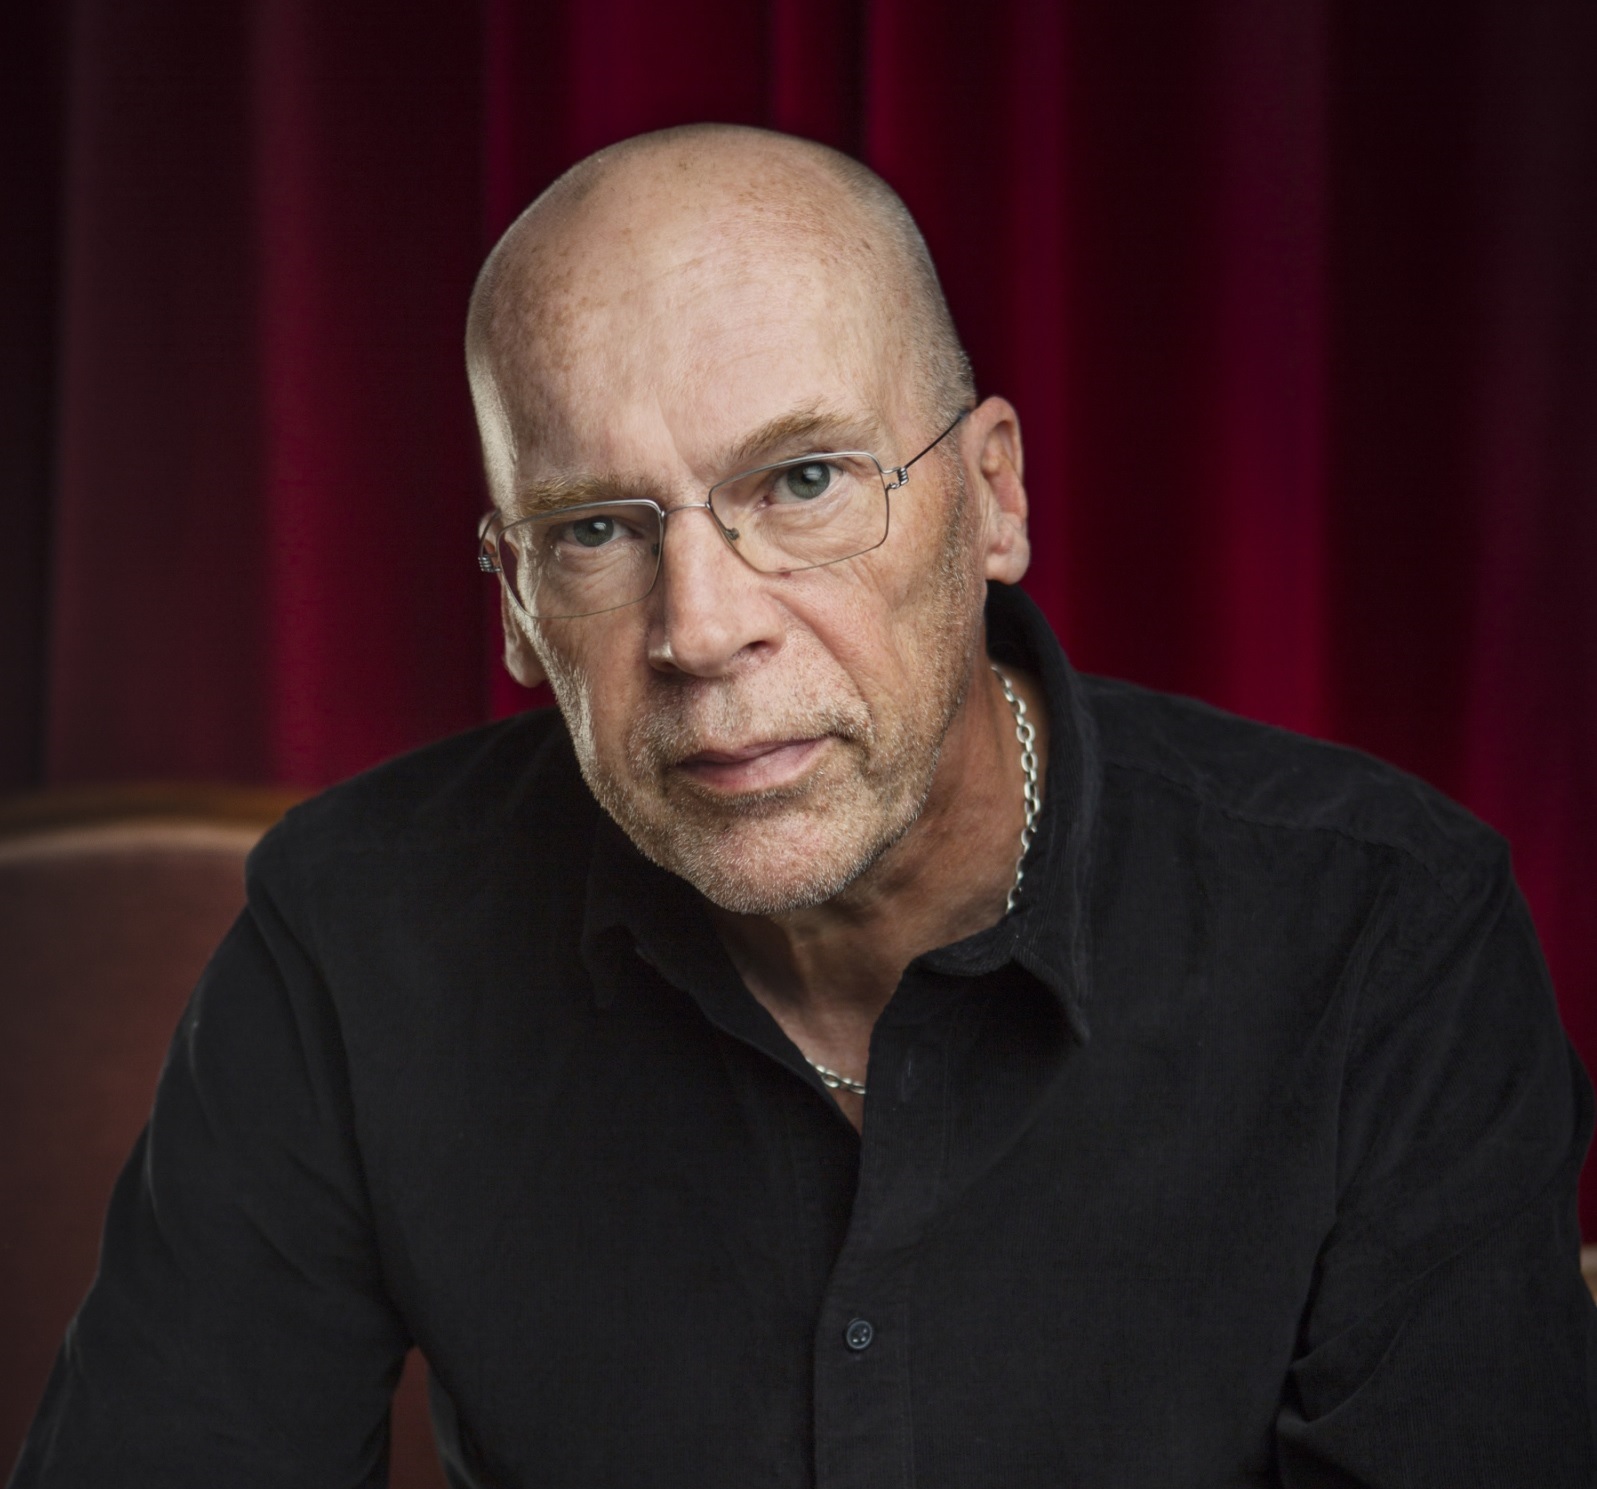 Robert Åsbacka leaning forward in black shirt, in front of a red background